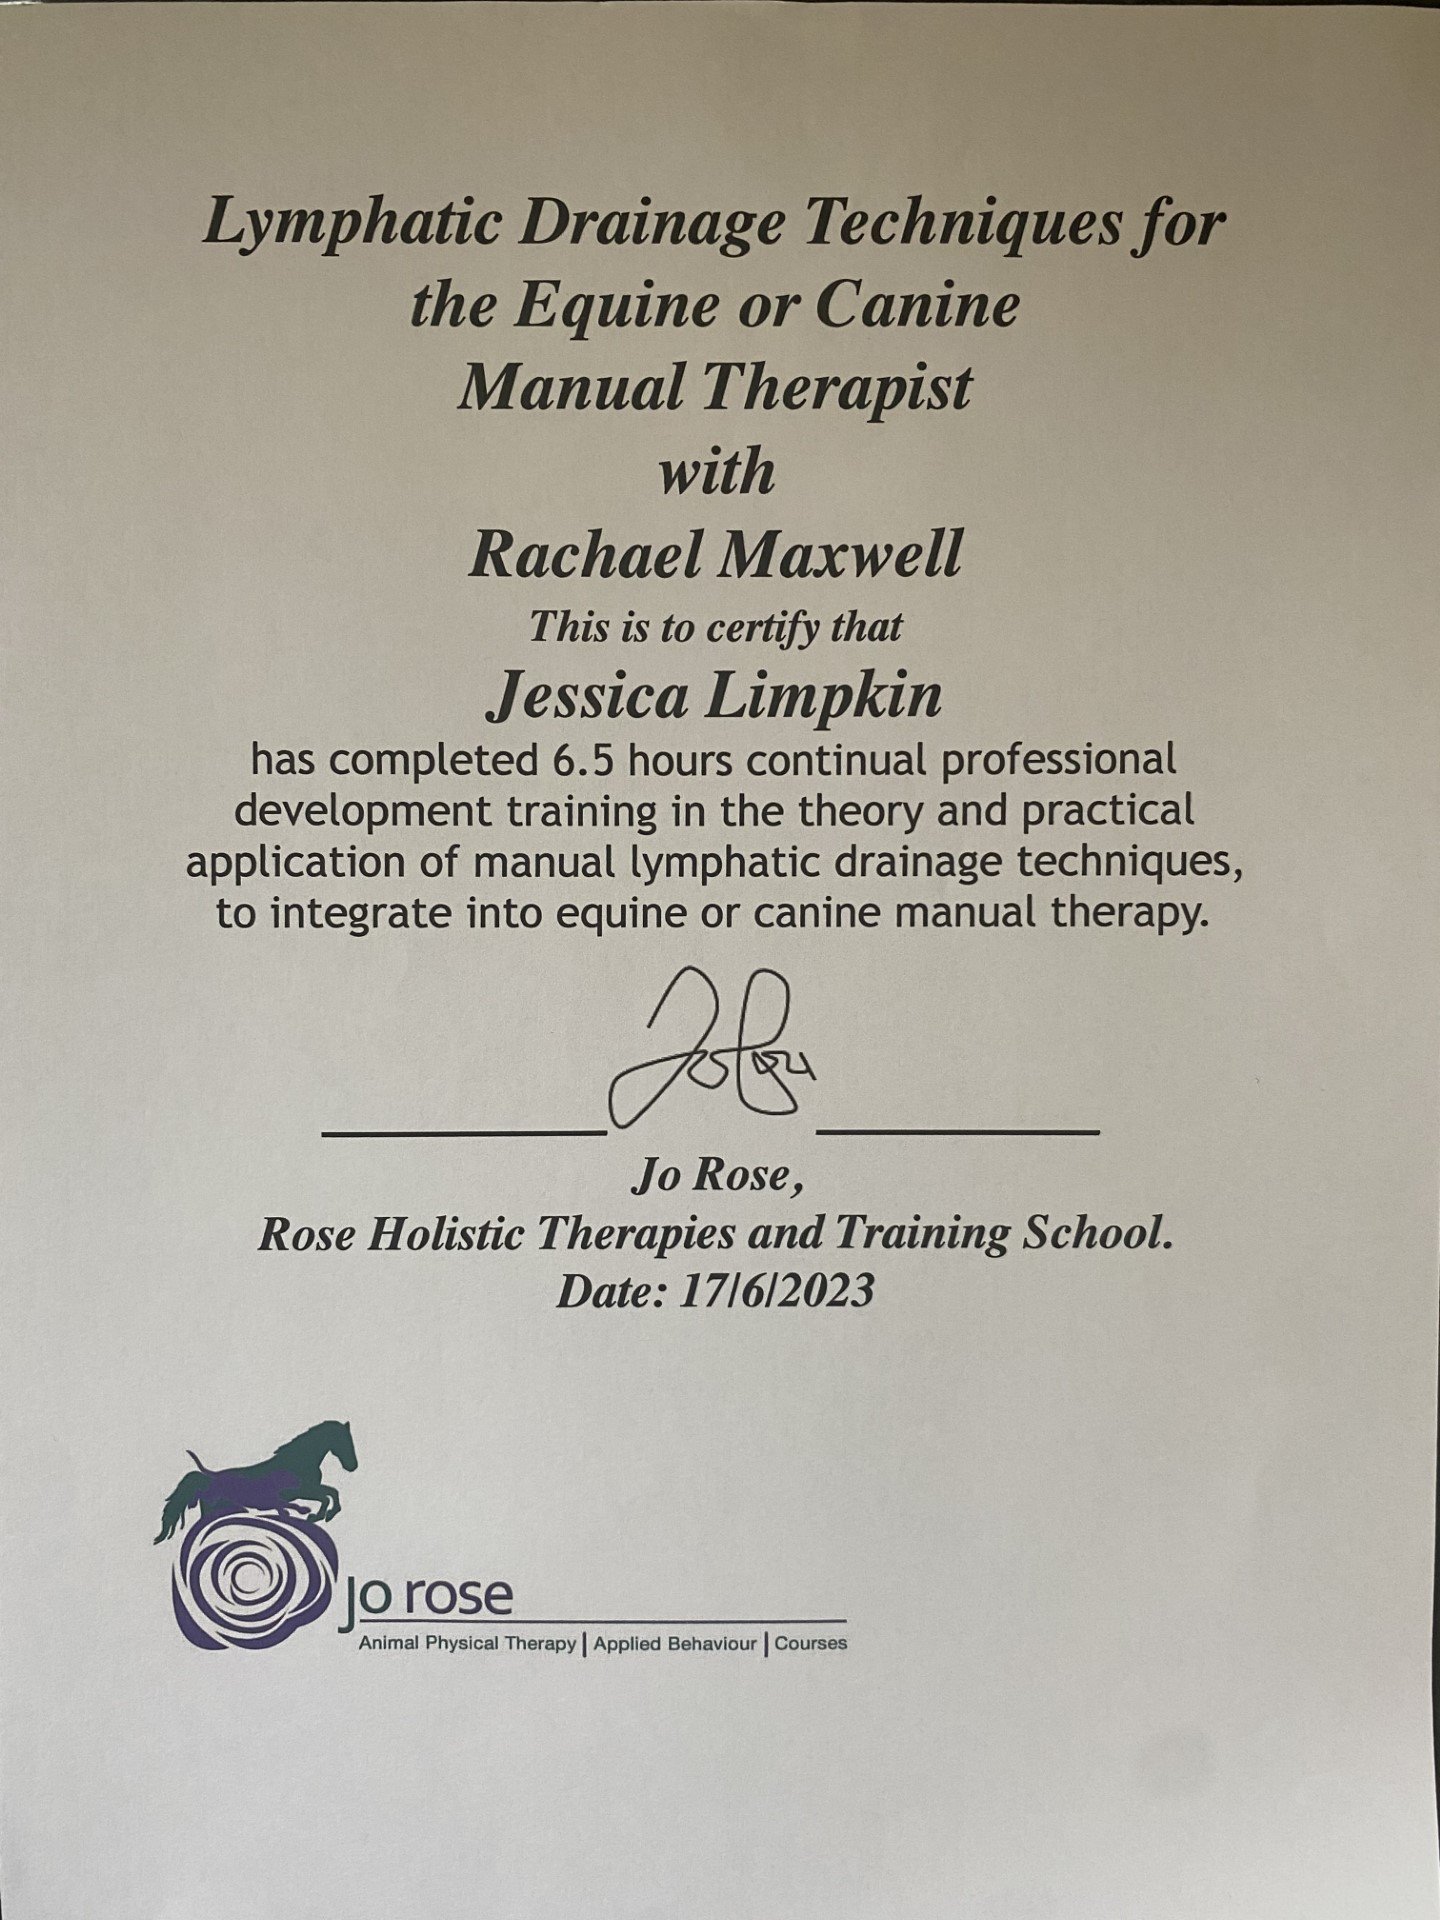 jessica_limpkin_equine_horse_massage_therapy_therapist_worcester_worcestershire_lymphatic_drainage_3.jpg